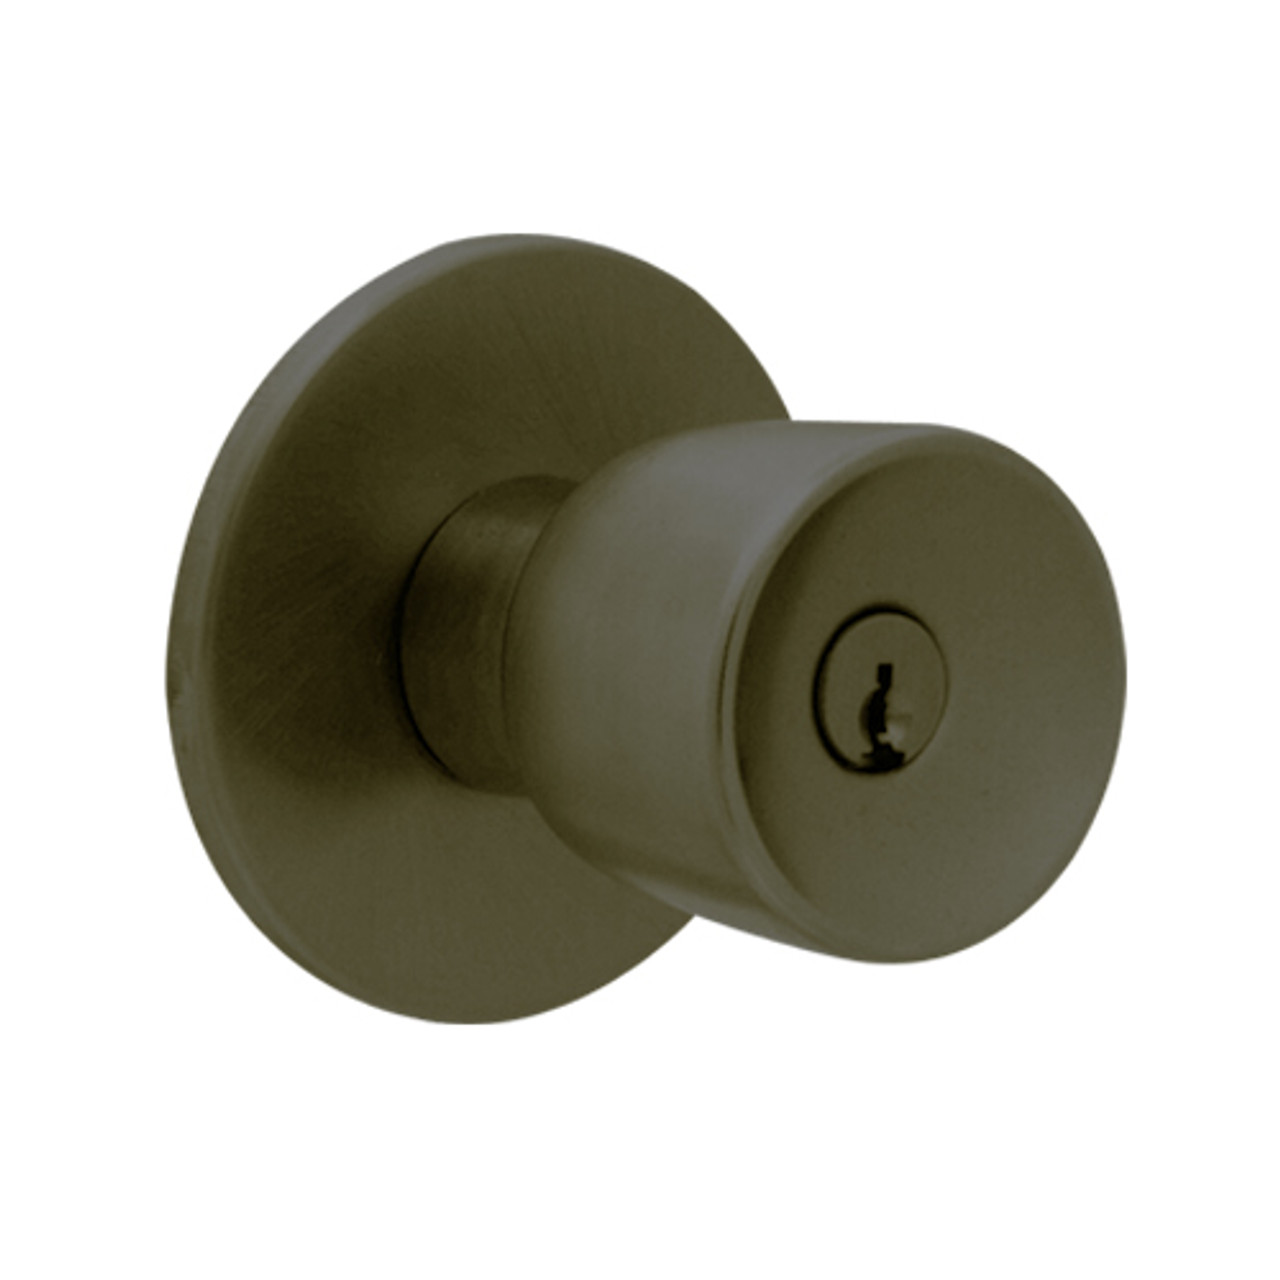 X501PD-EY-613 Falcon X Series Cylindrical Entry Lock with Elite-York Knob Style in Oil Rubbed Bronze Finish